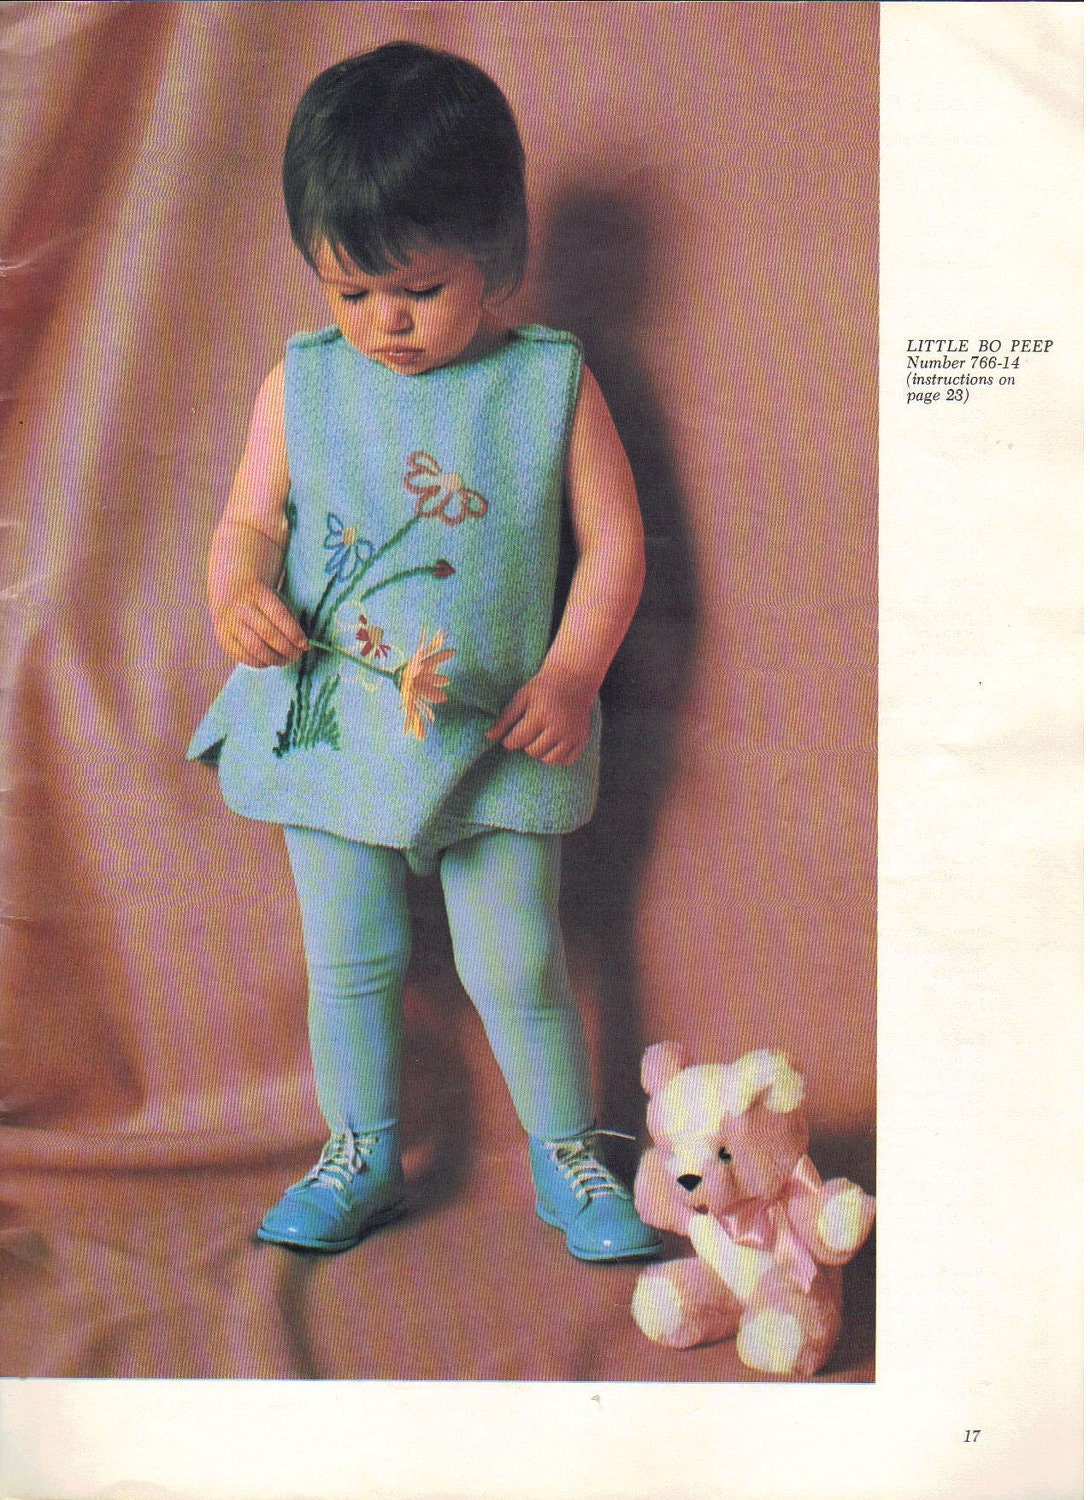 Retro 1960s Pattern Book for Crochet Knitting Baby Children Fashion Vintage Knit Pants Sweater Blanket Hats Instructions - AdeleBeeAnnPatterns